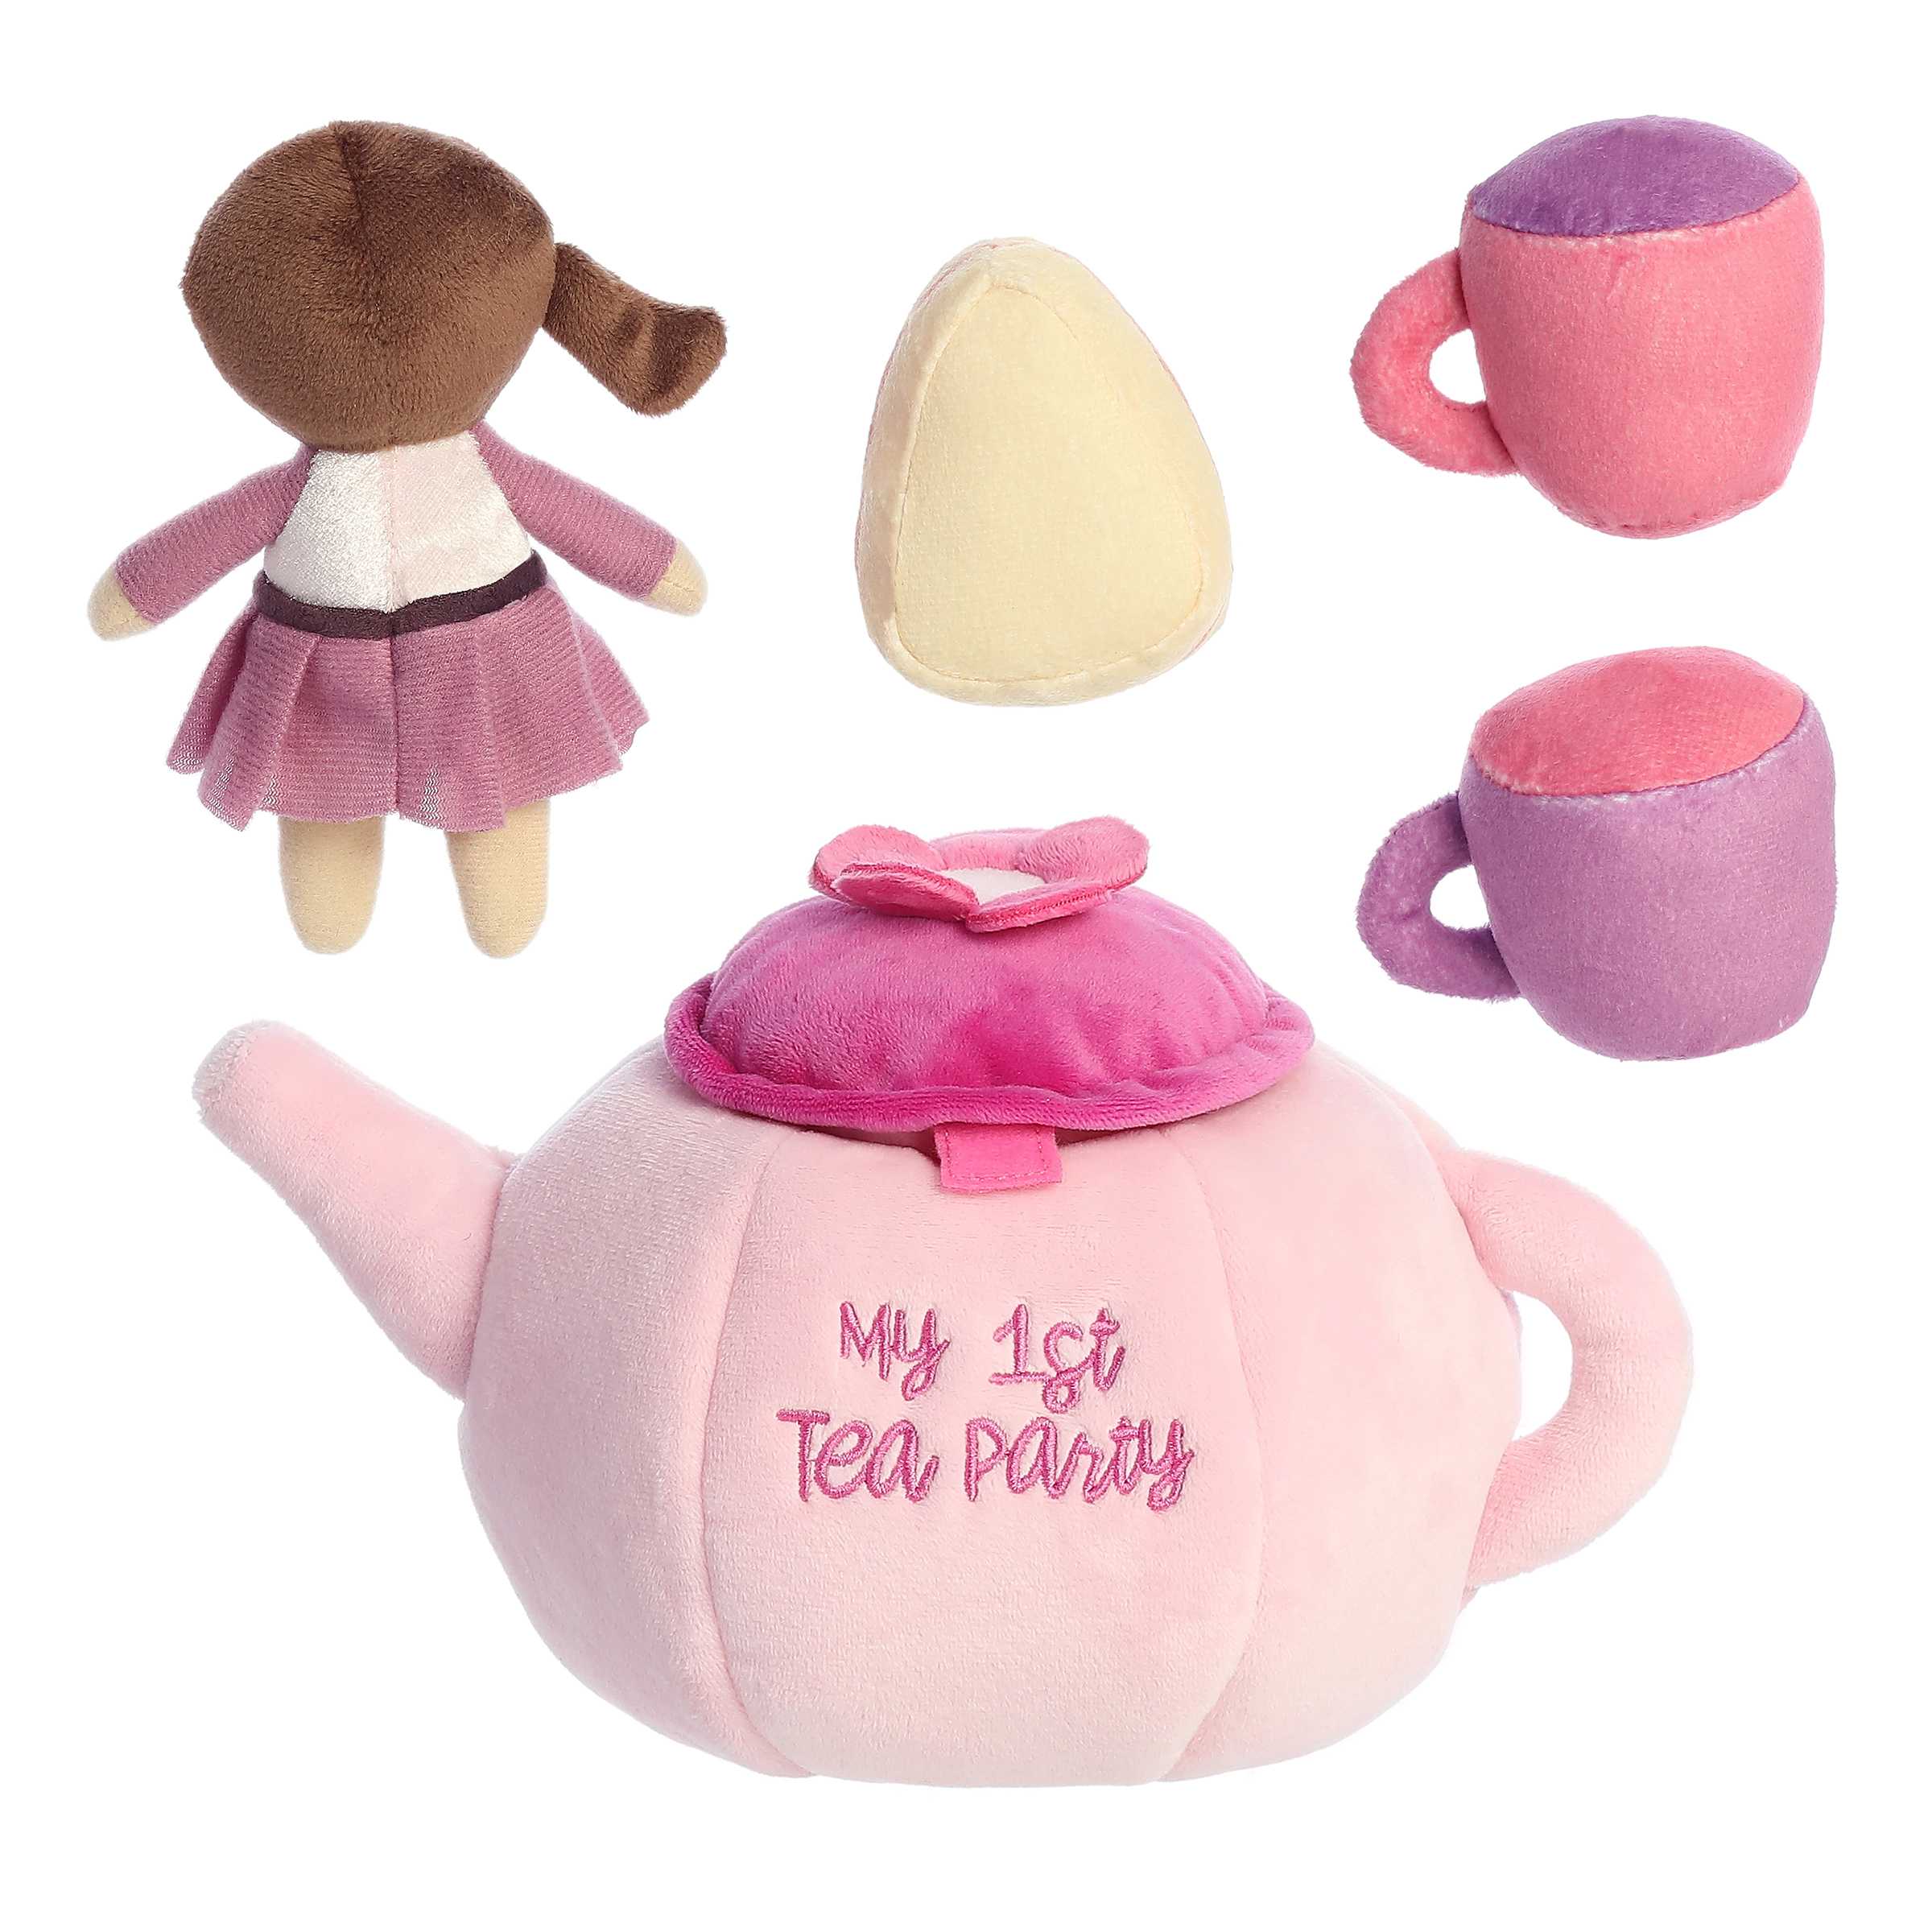 ebba™ - Baby Talk™ - 9" My Lil Tea Party™